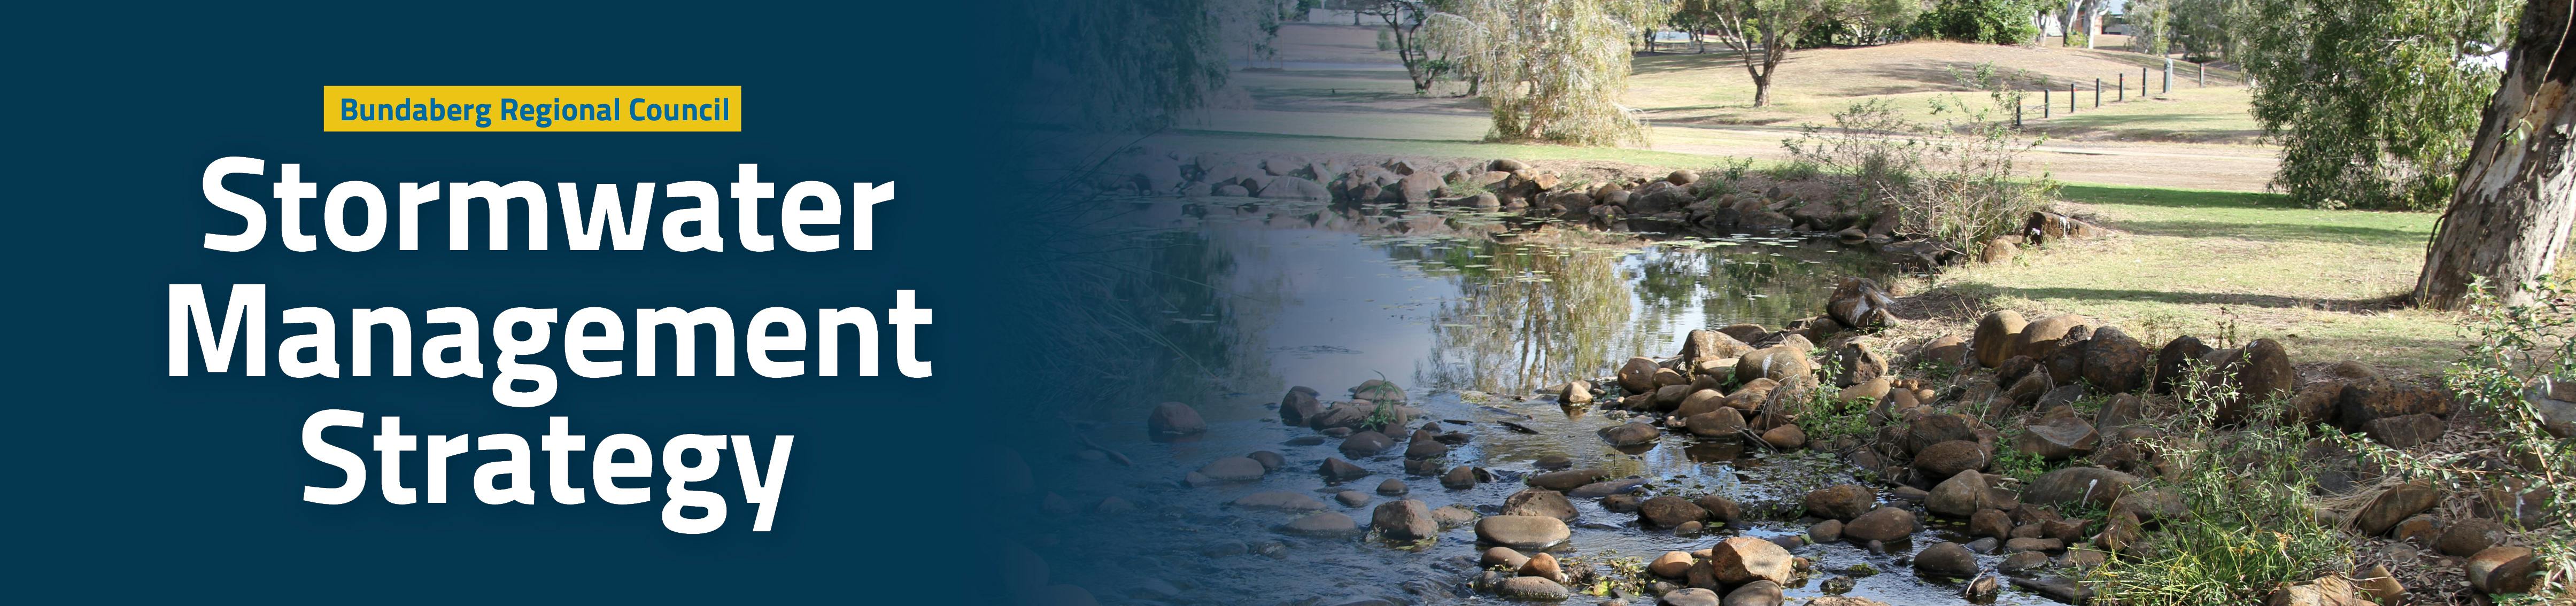 The draft Bundaberg Regional Council Stormwater Management Strategy is now open for submissions